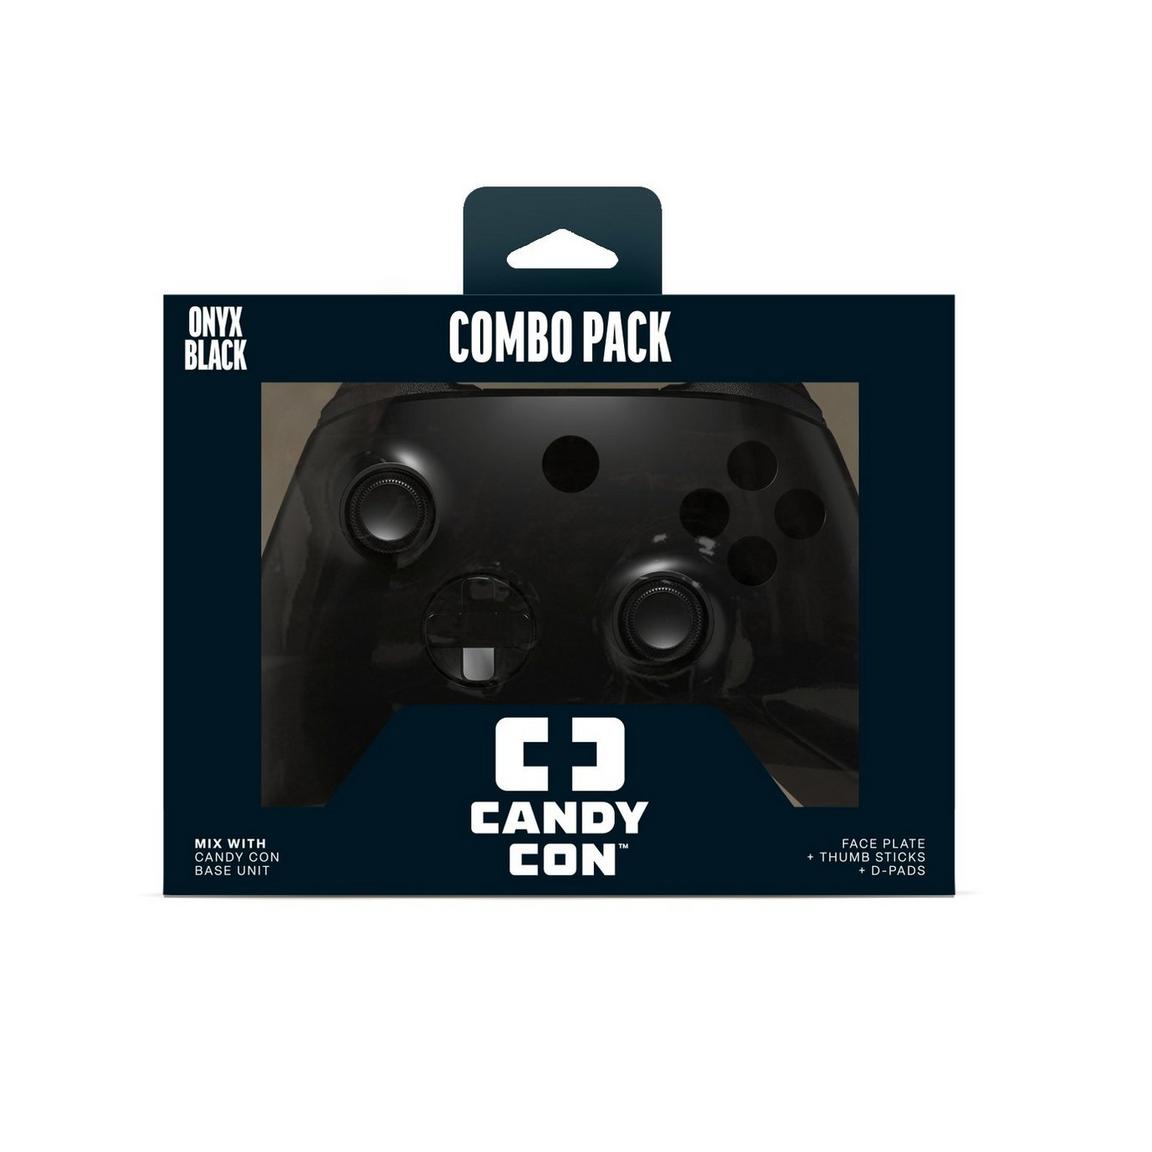 CANDY CON Combo Pack Controller Kit - Onyx Black